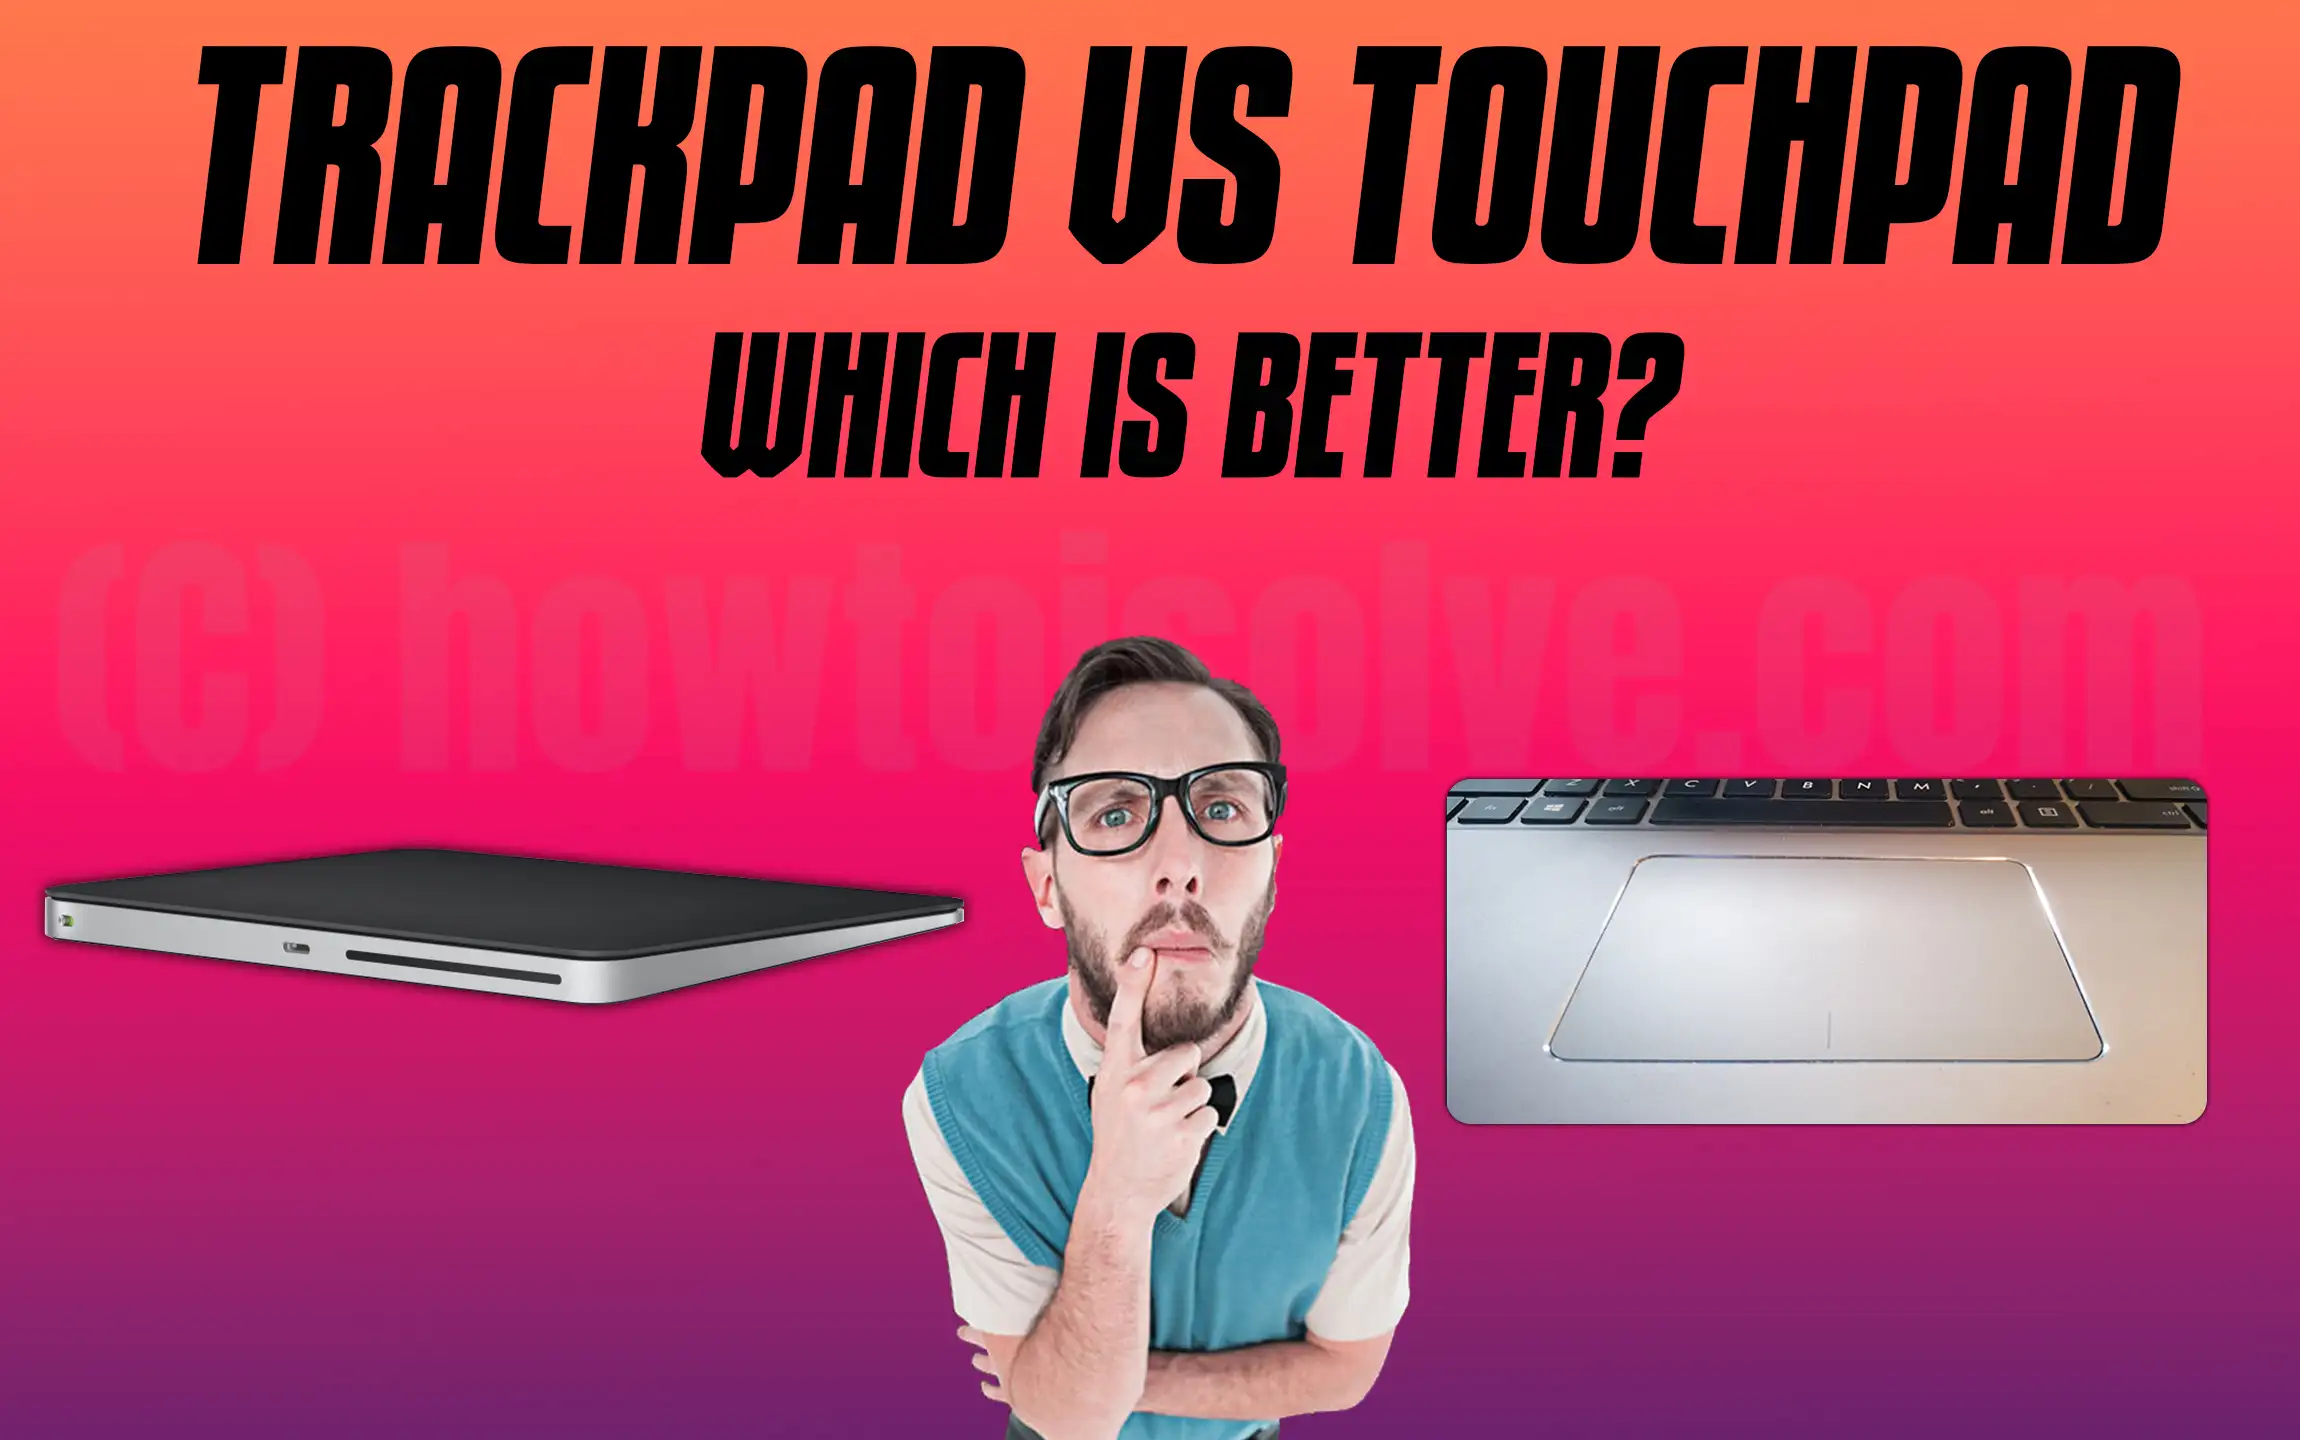 Trackpad VS Touchpad, Which is Better